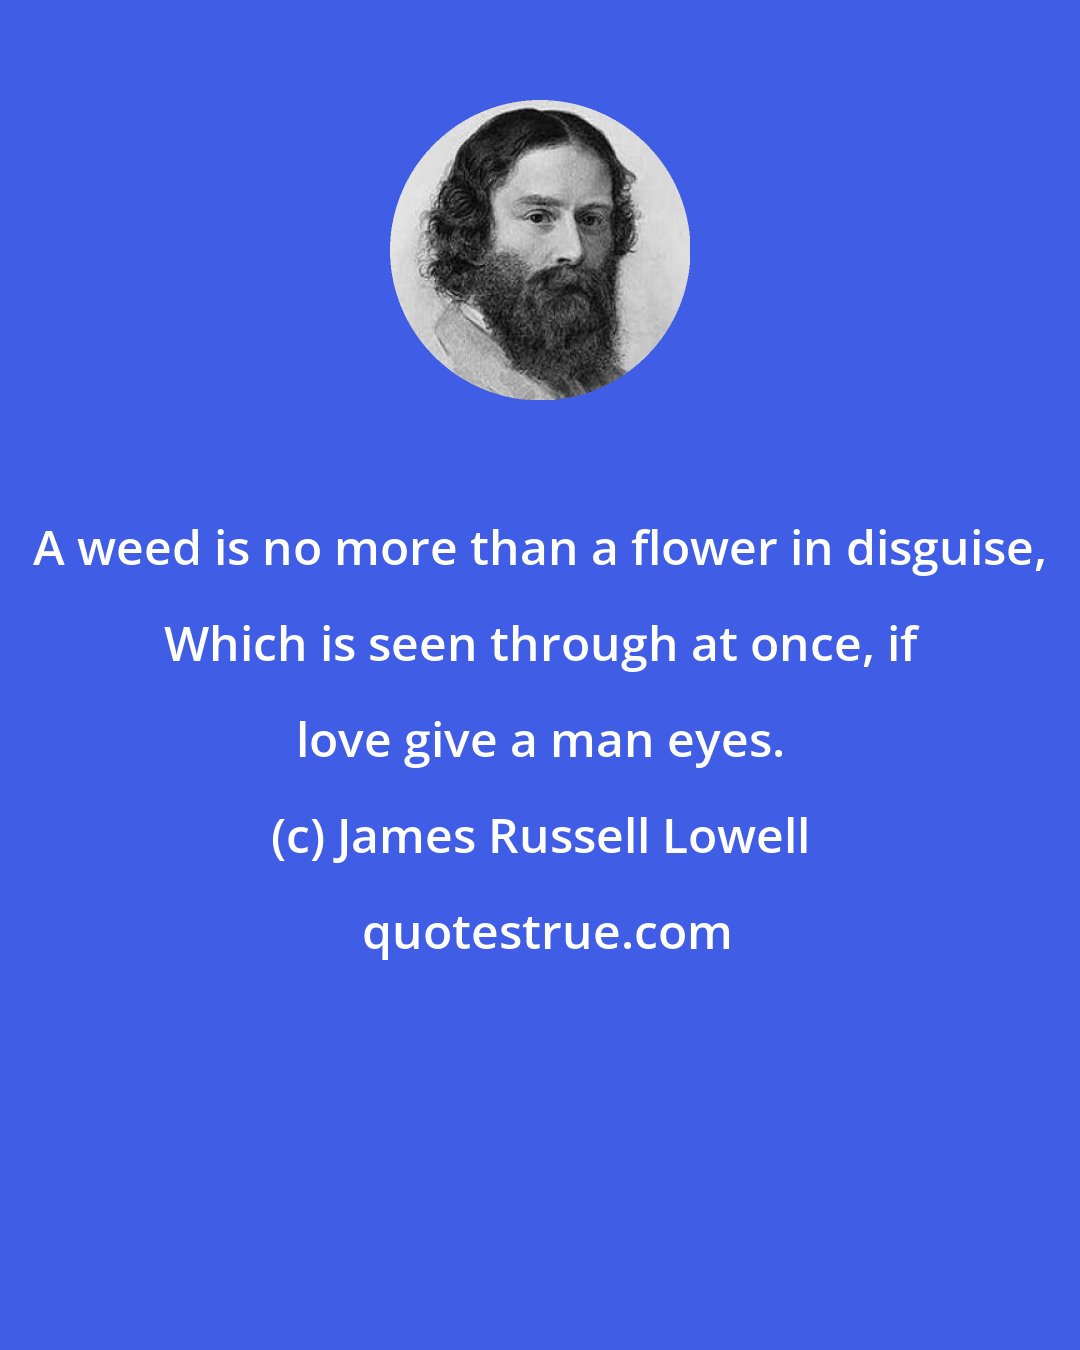 James Russell Lowell: A weed is no more than a flower in disguise, Which is seen through at once, if love give a man eyes.